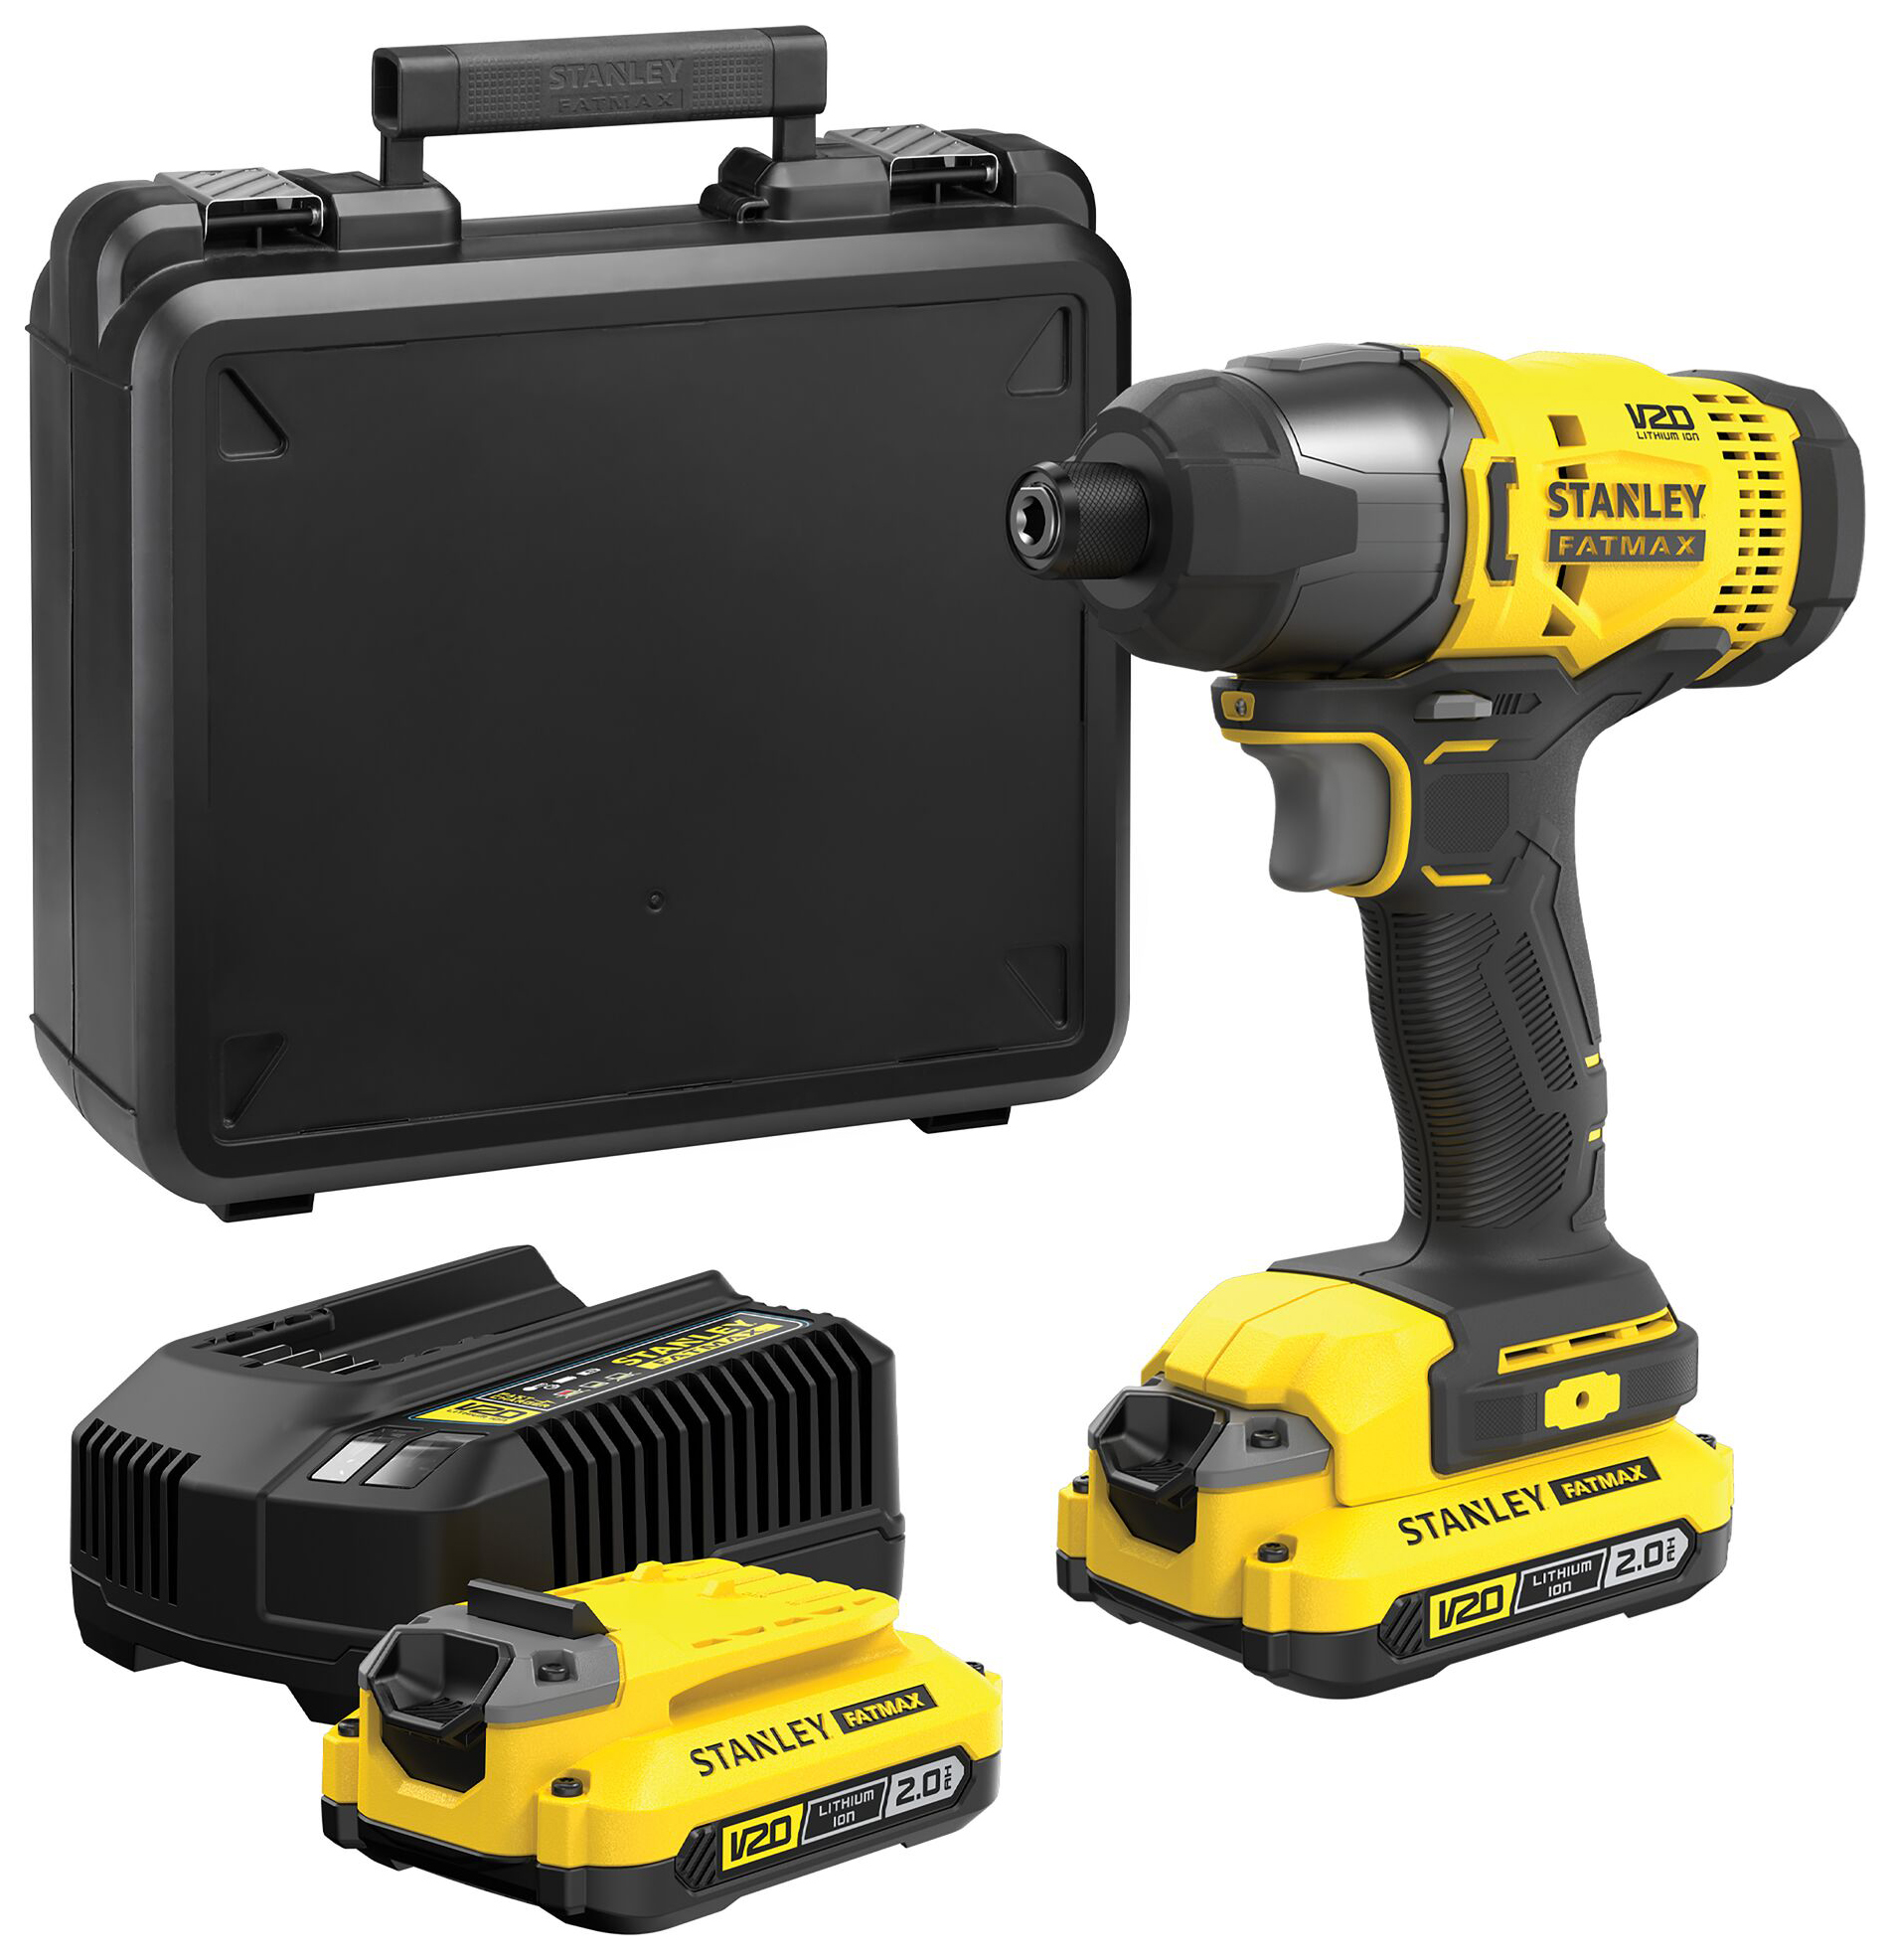 Stanley FatMax V20 SFMCF800D2K-GB 18V 2 x 2.0AH Cordless Brushed Impact Drill Driver with Kitbox